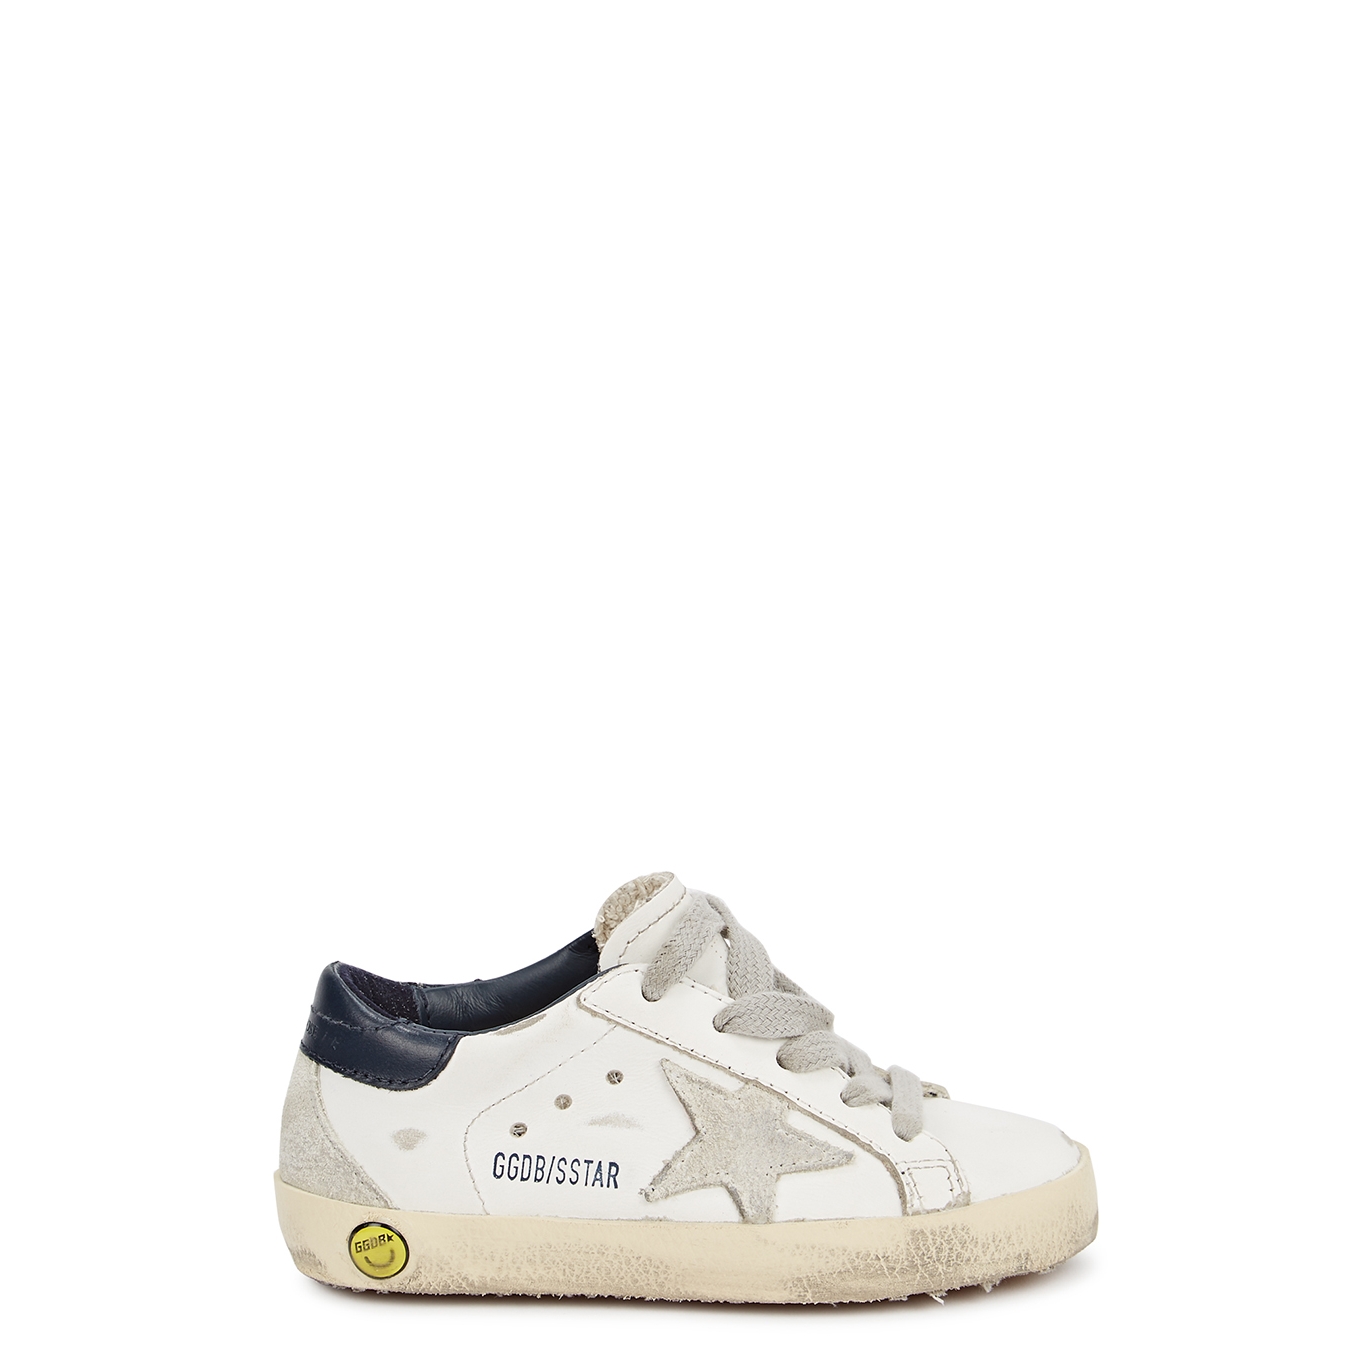 Golden Goose Kids Superstar White Leather Sneakers (IT19-IT27) - White & Other - 7 Baby